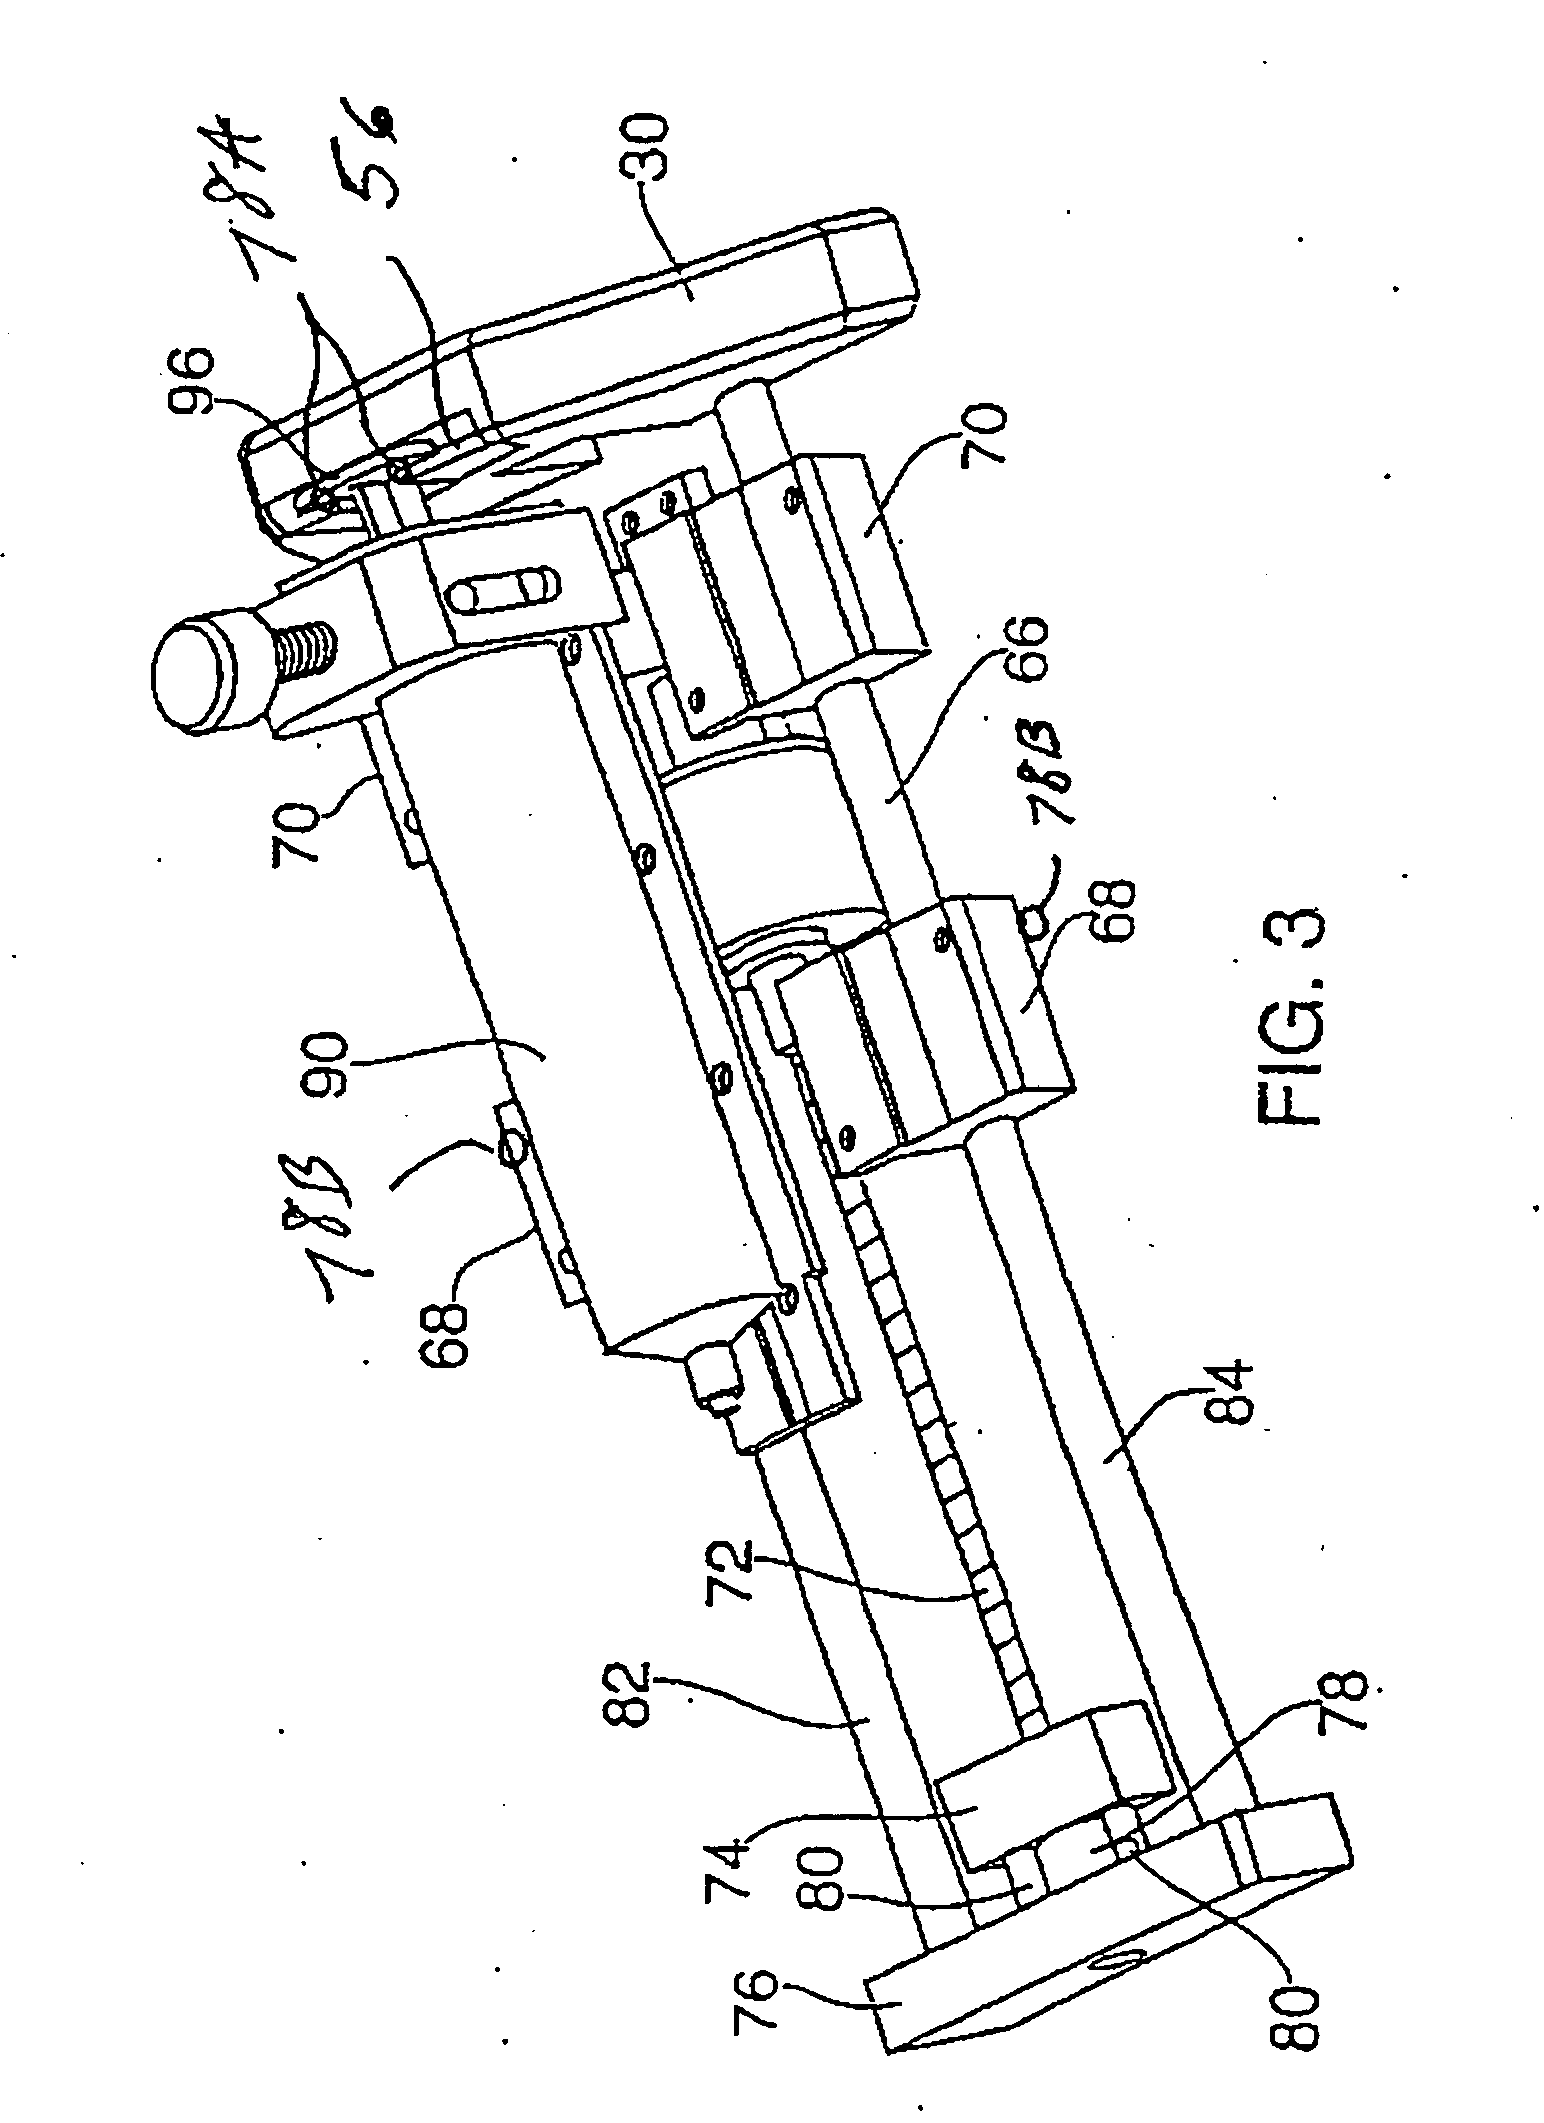 Handpiece for fluid administration apparatus